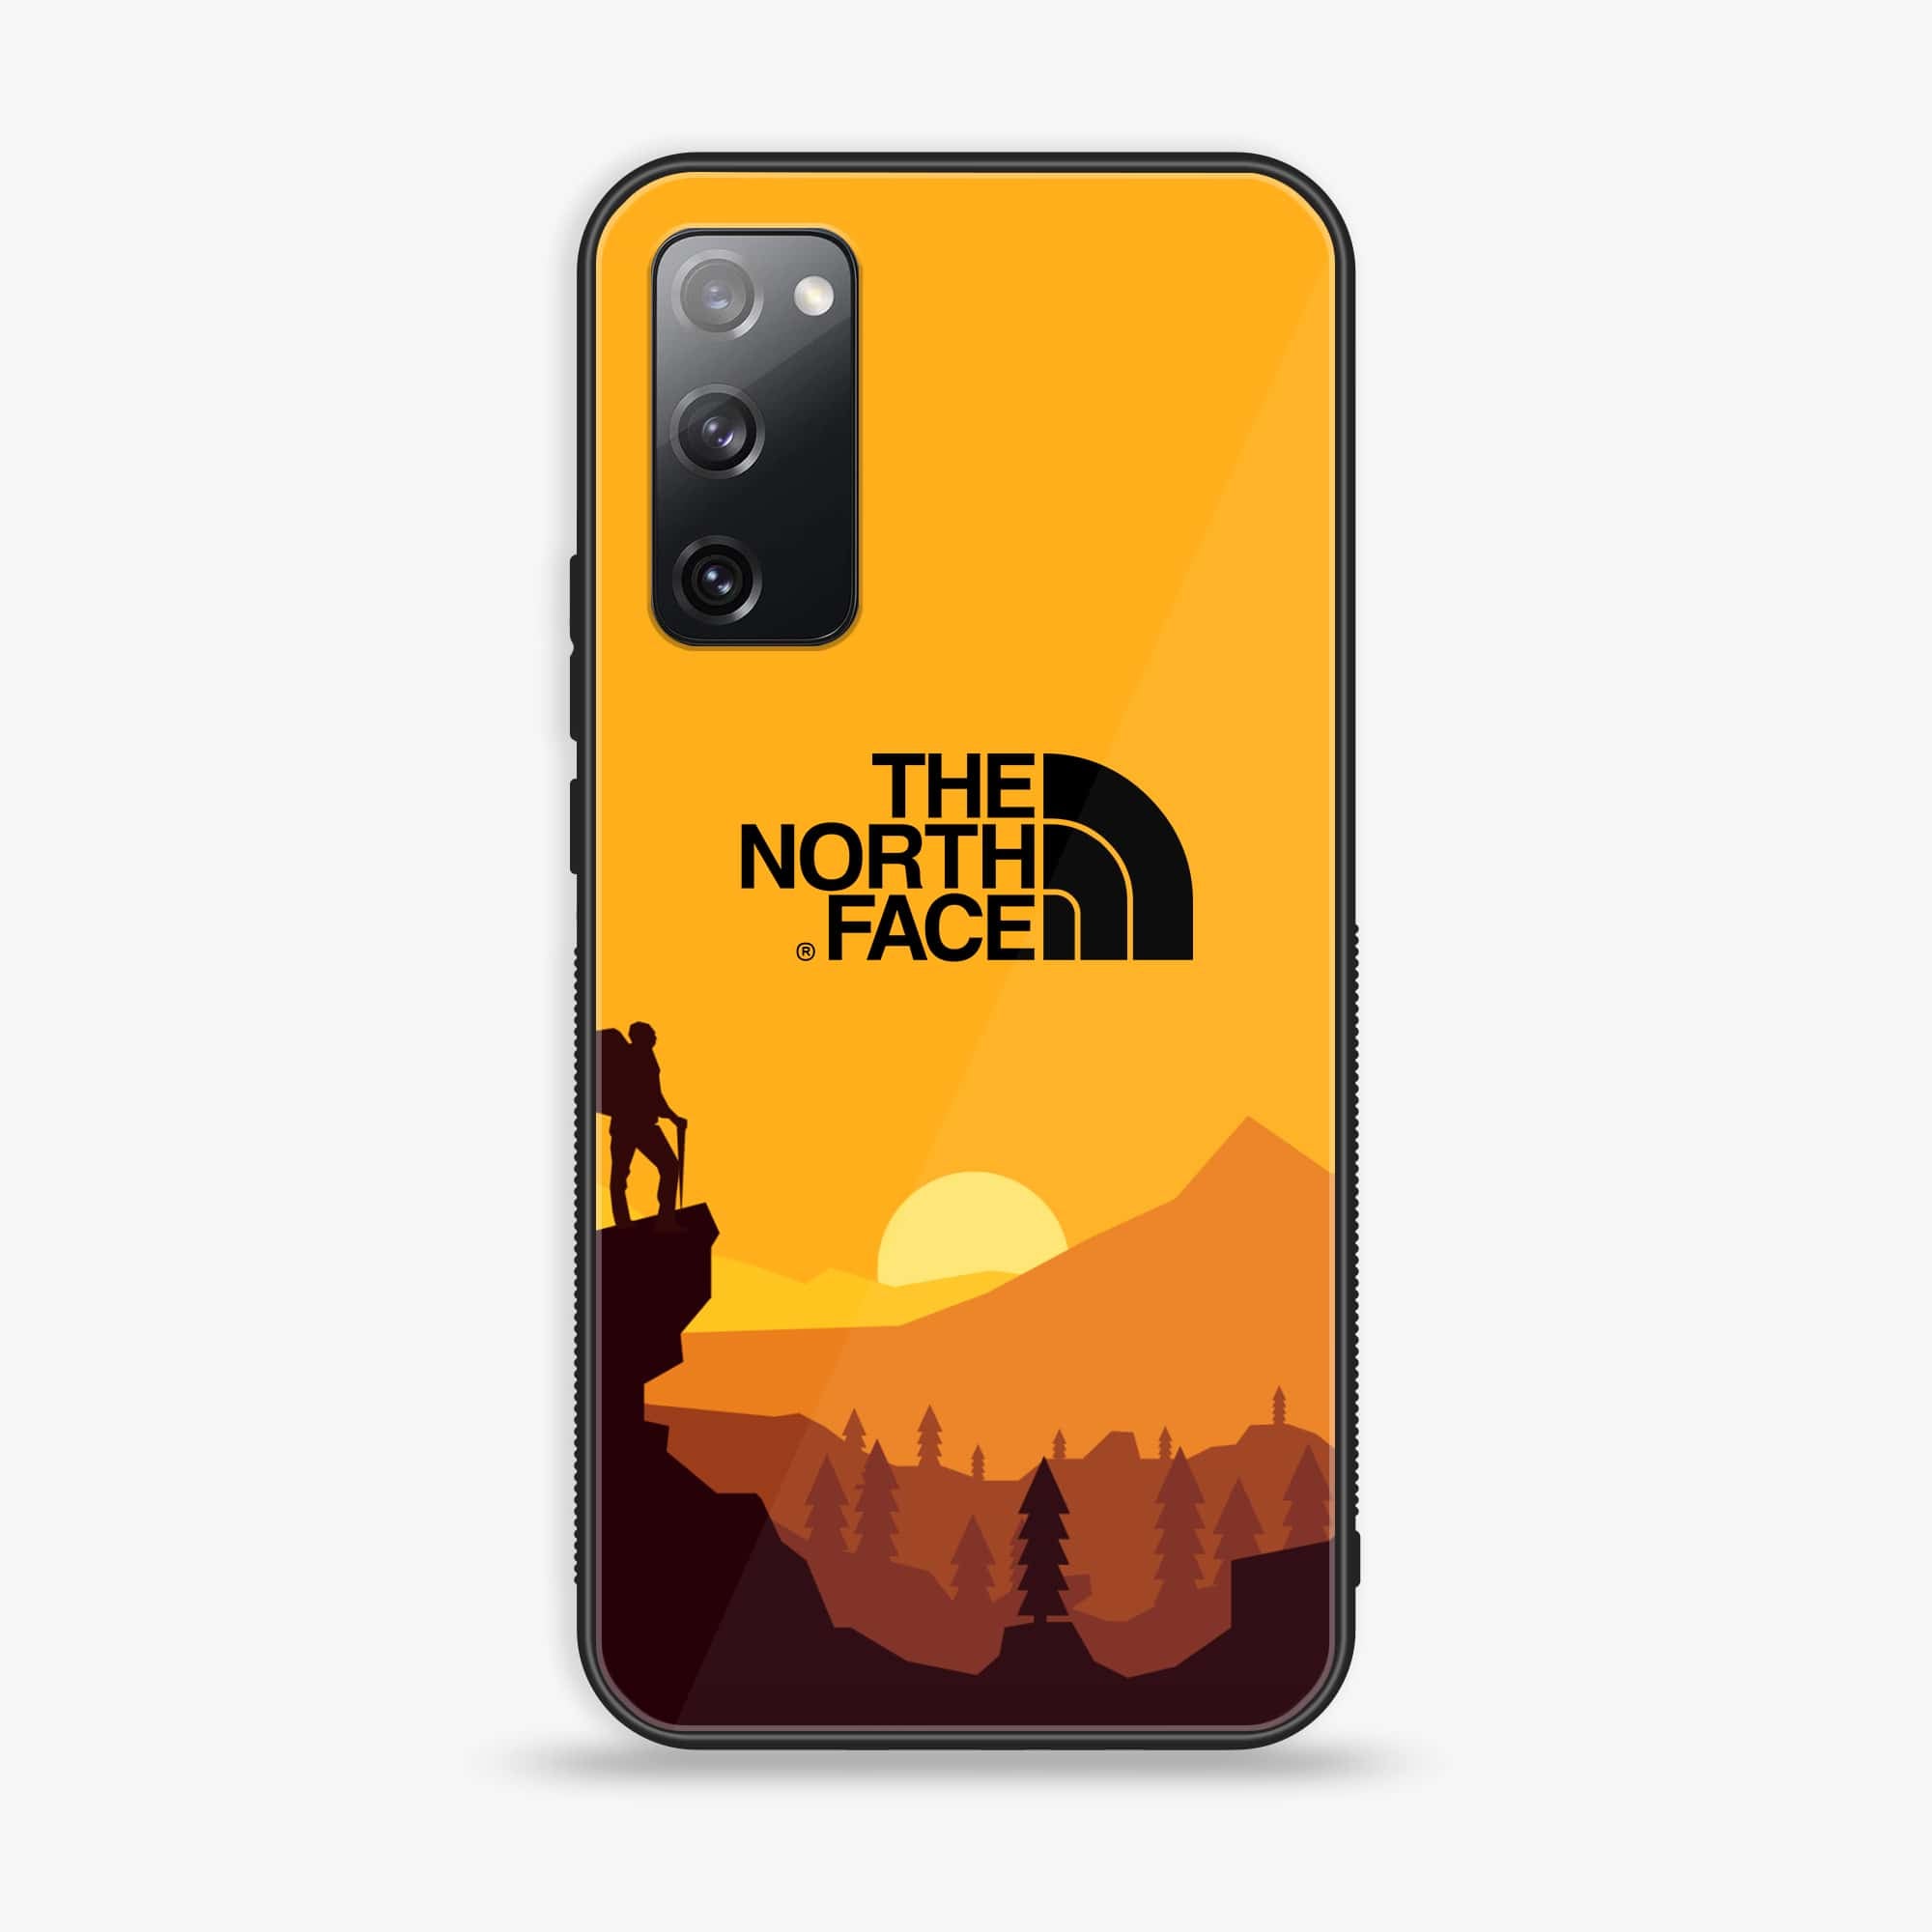 Samsung Galaxy S20 FE The North Face Series Premium Printed Glass soft Bumper shock Proof Case